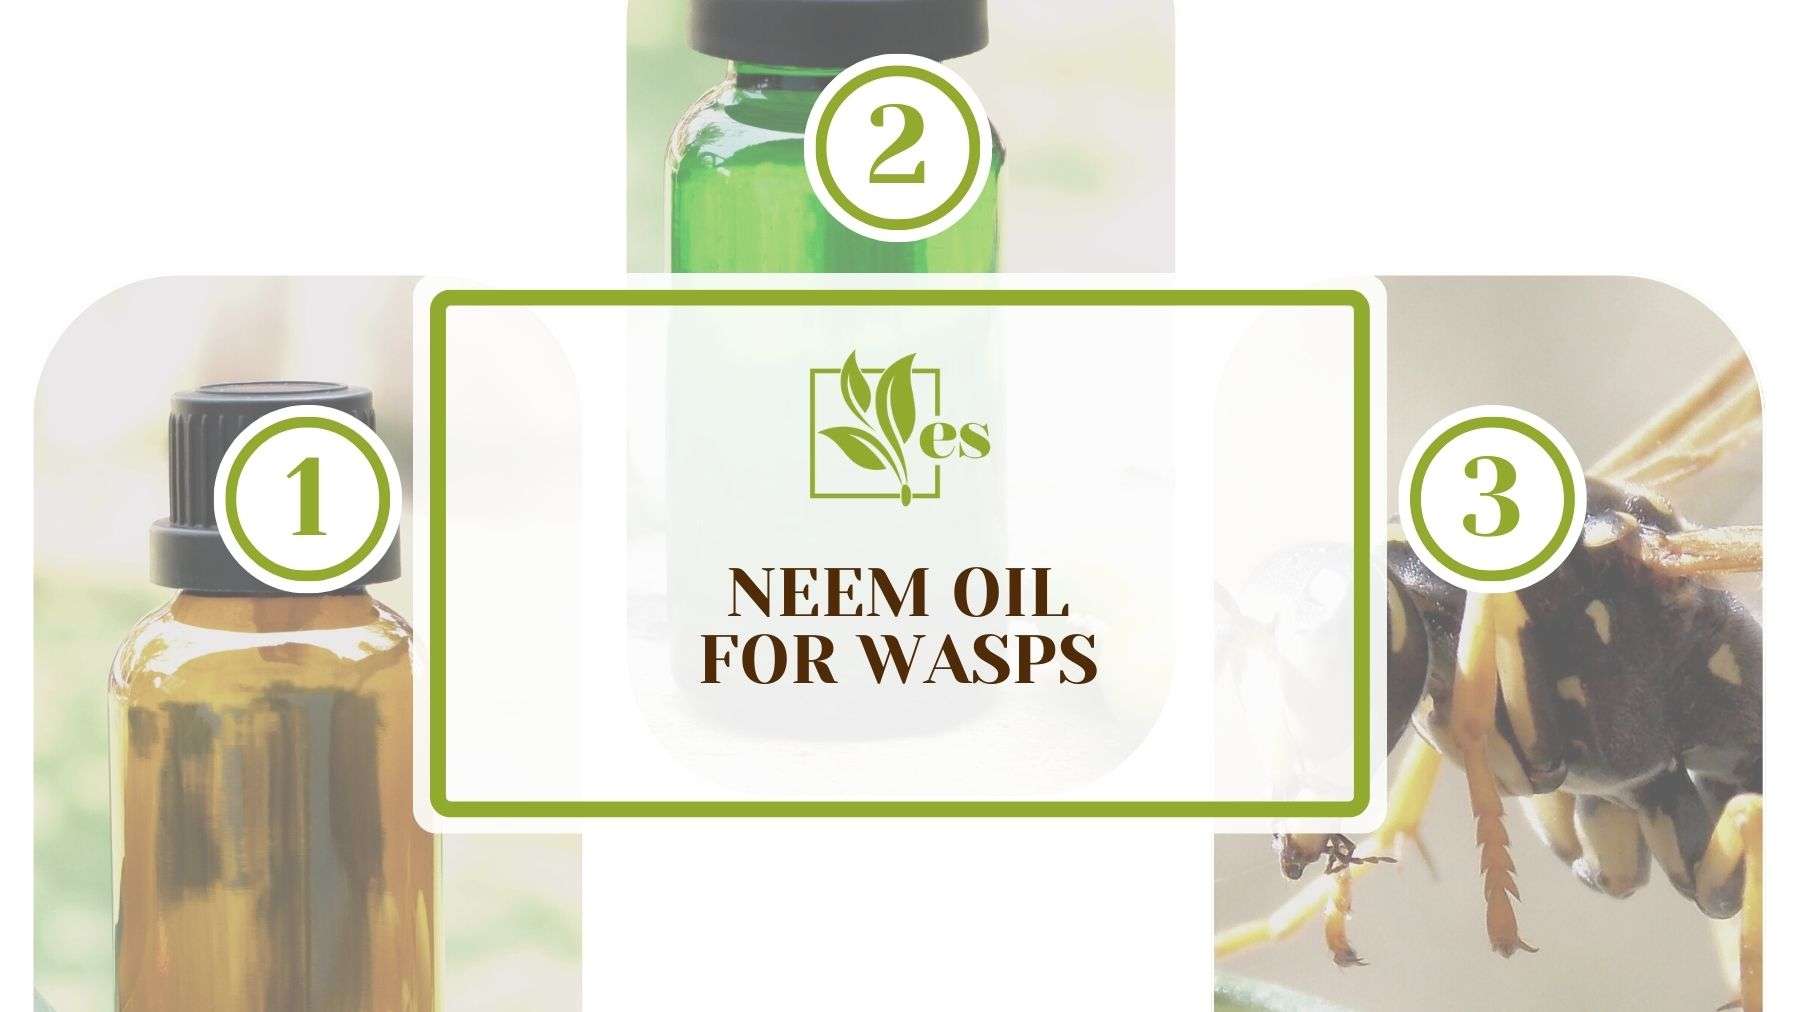 Neem Oil for Wasps